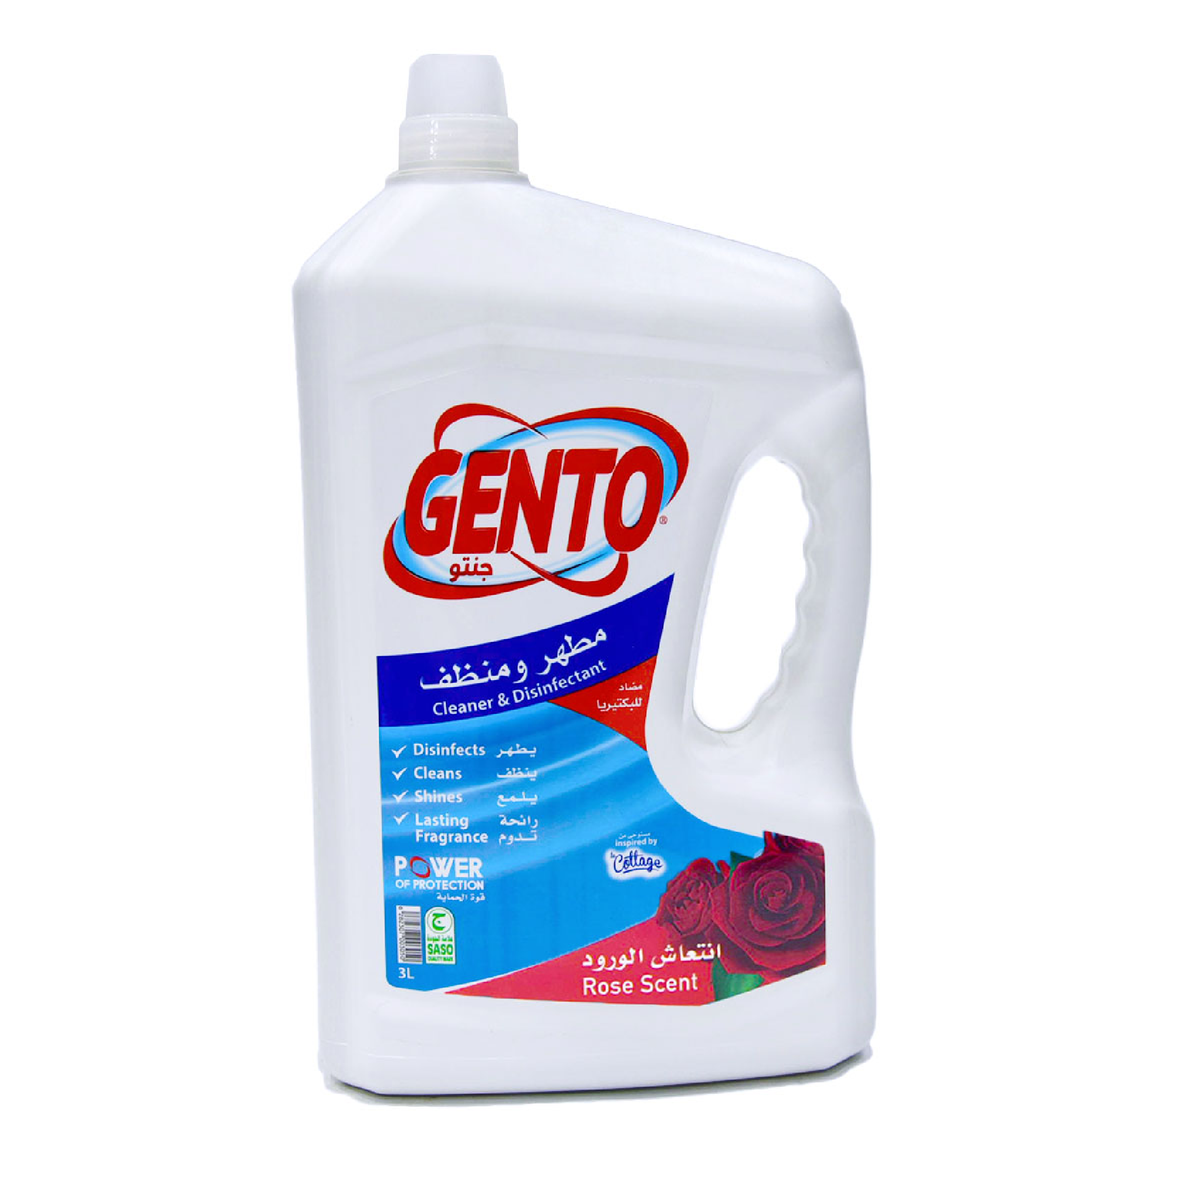 Gento Cleaner & Disinfectant 3L